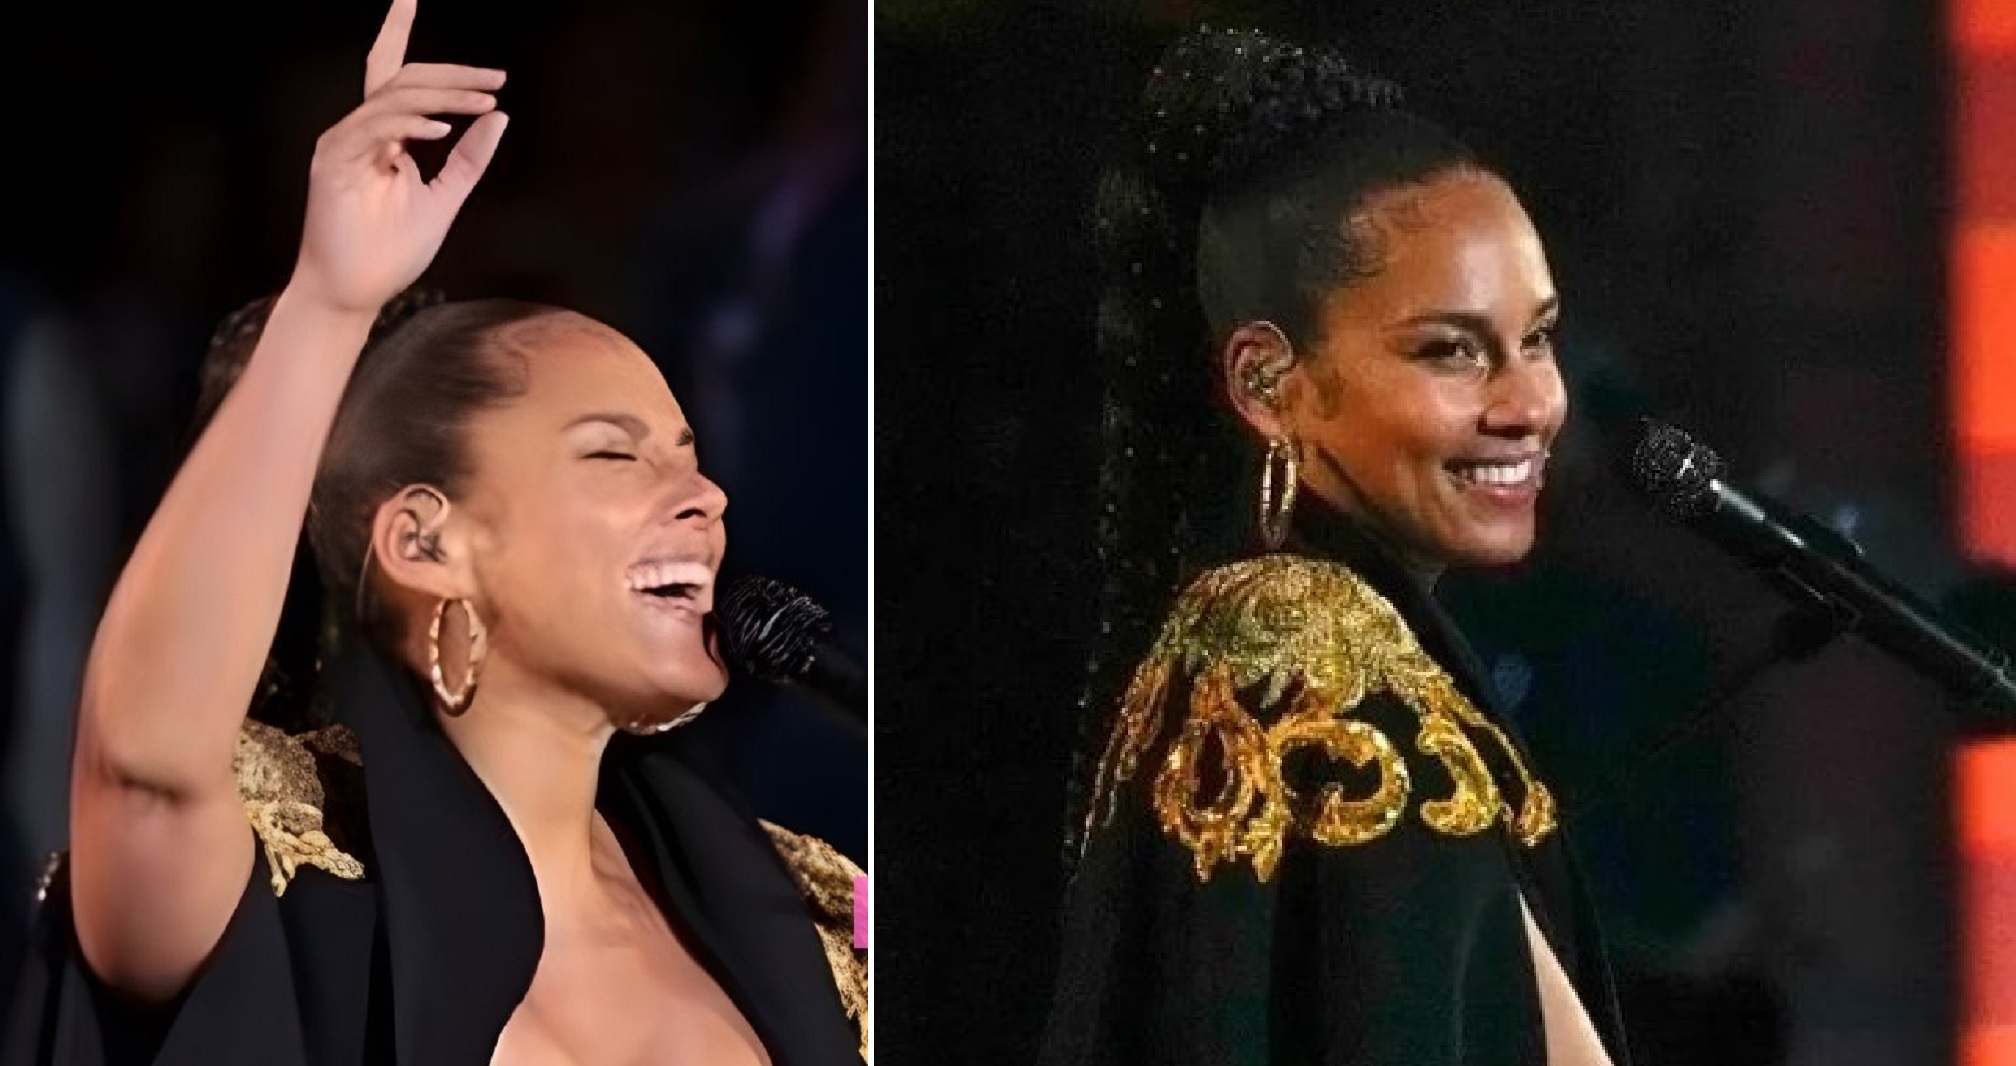 Watch: Alicia Keys STUNS With Live Performances Of ‘Superwoman’, ‘Girl On Fire’ & More At The Queen’s Platinum Jubilee at the Palace